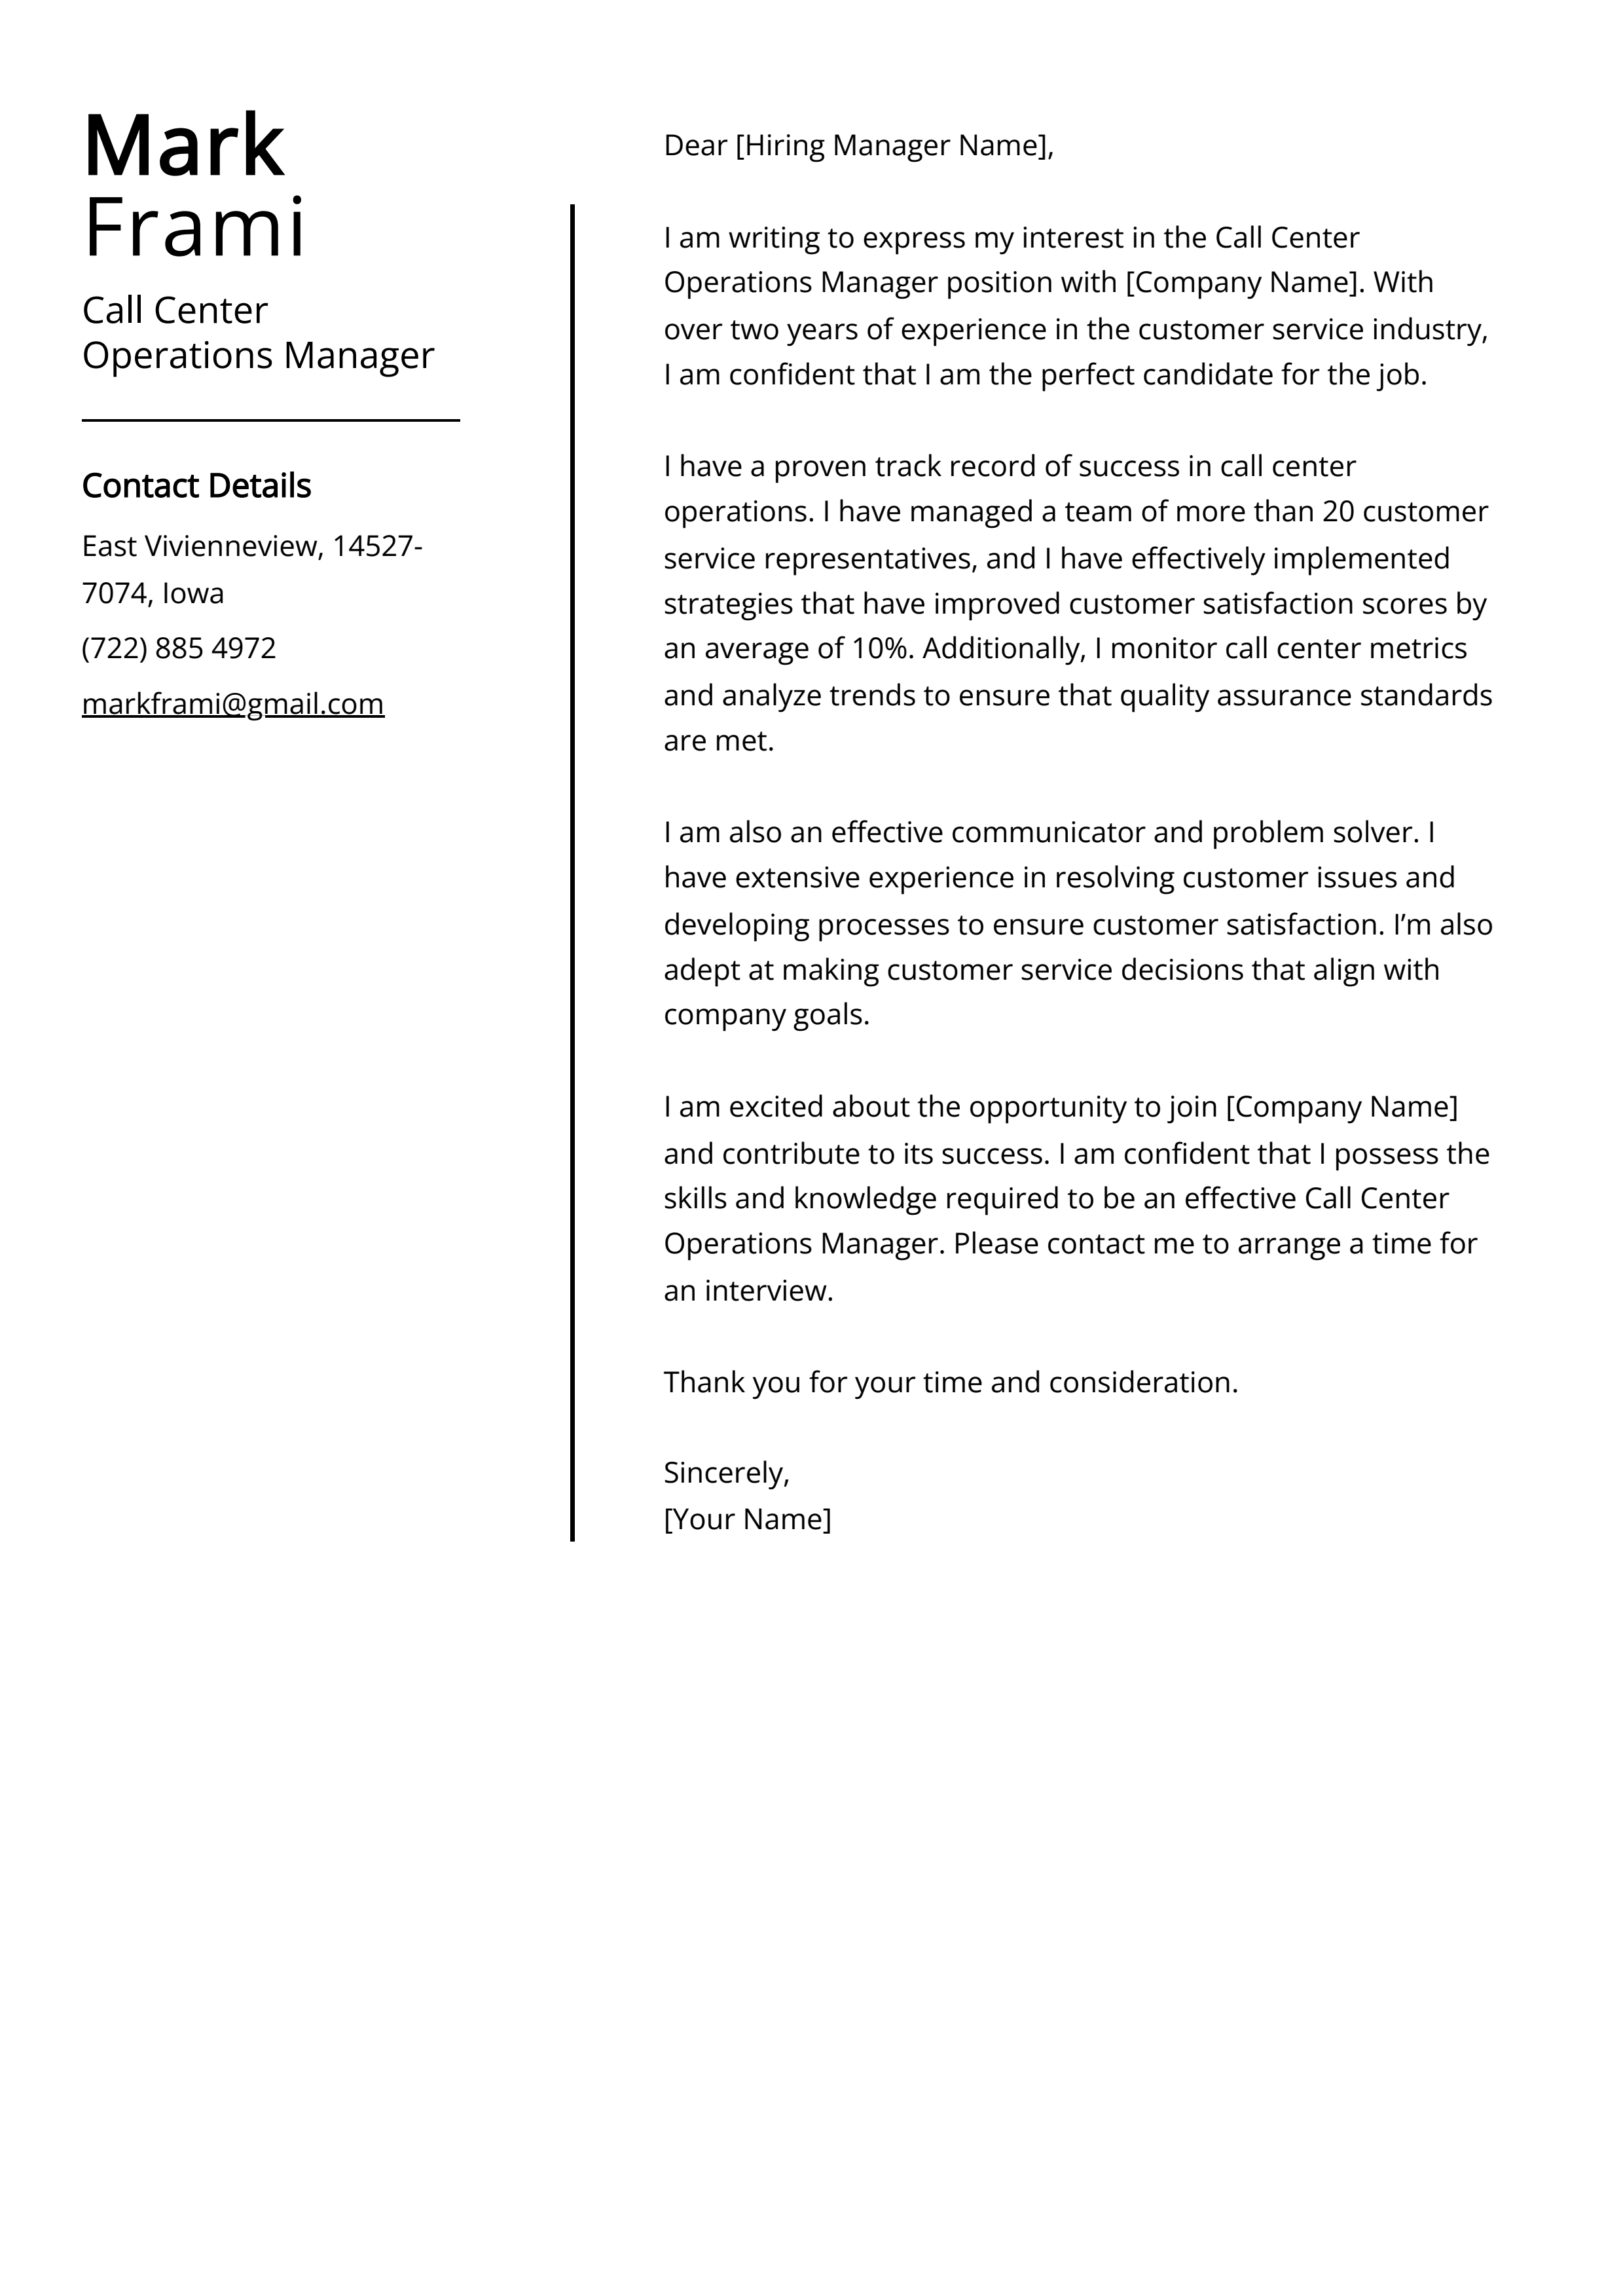 Call Center Operations Manager Cover Letter Example